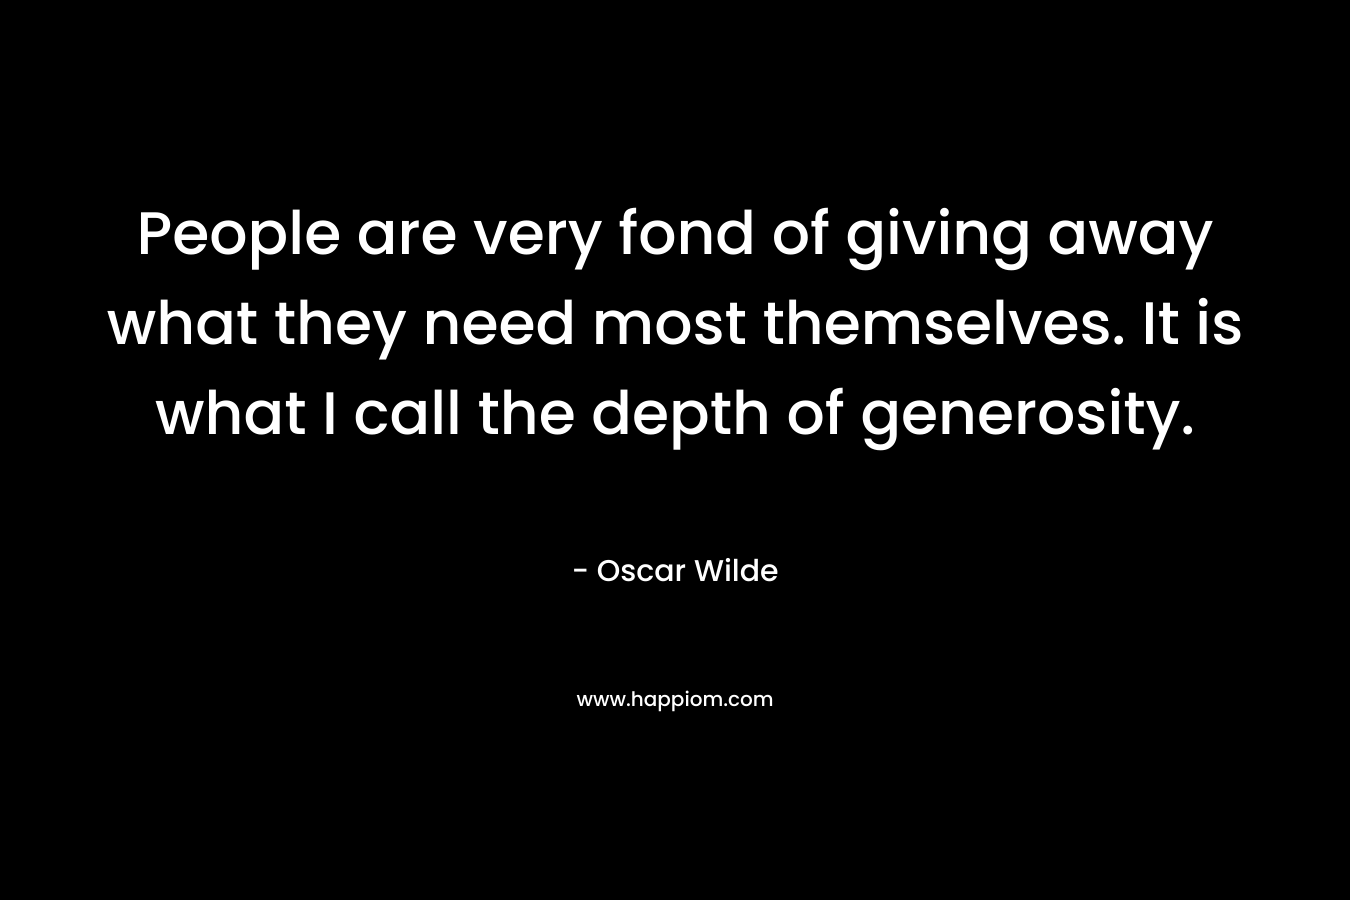 People are very fond of giving away what they need most themselves. It is what I call the depth of generosity.